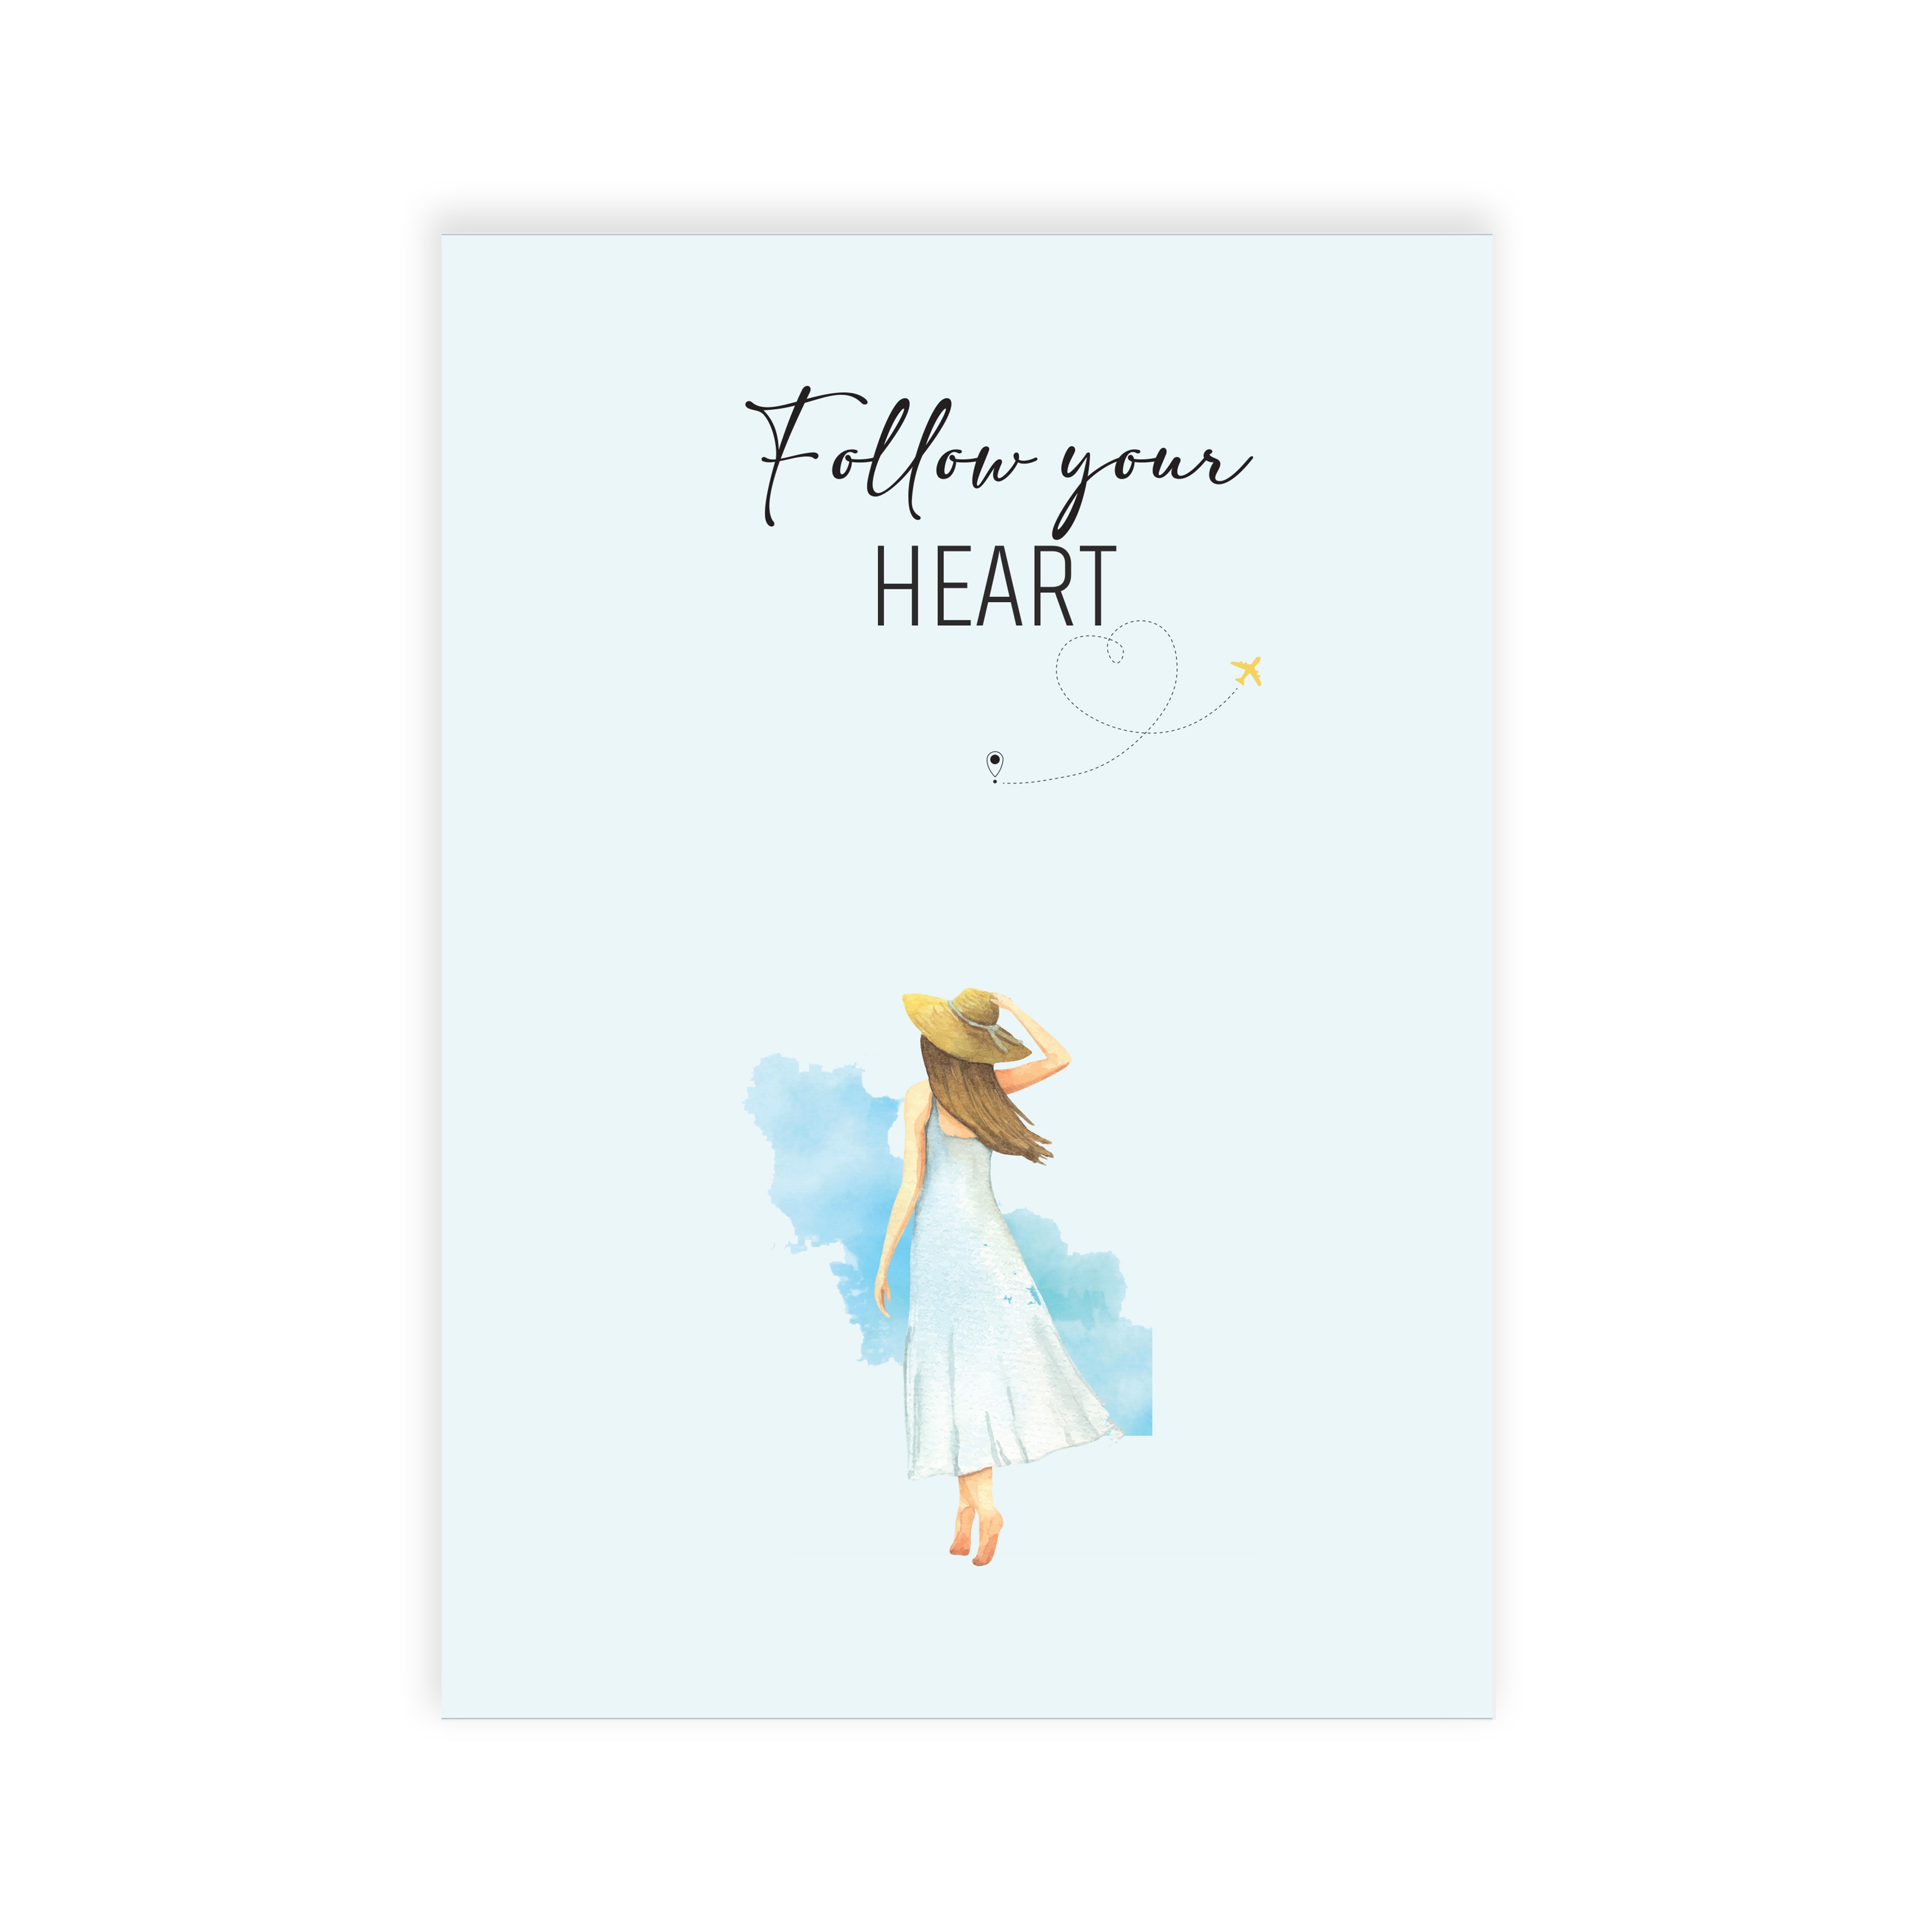 Collectable Notebook Follow Your Heart Ruled A5 90gsm 64pages 1Book